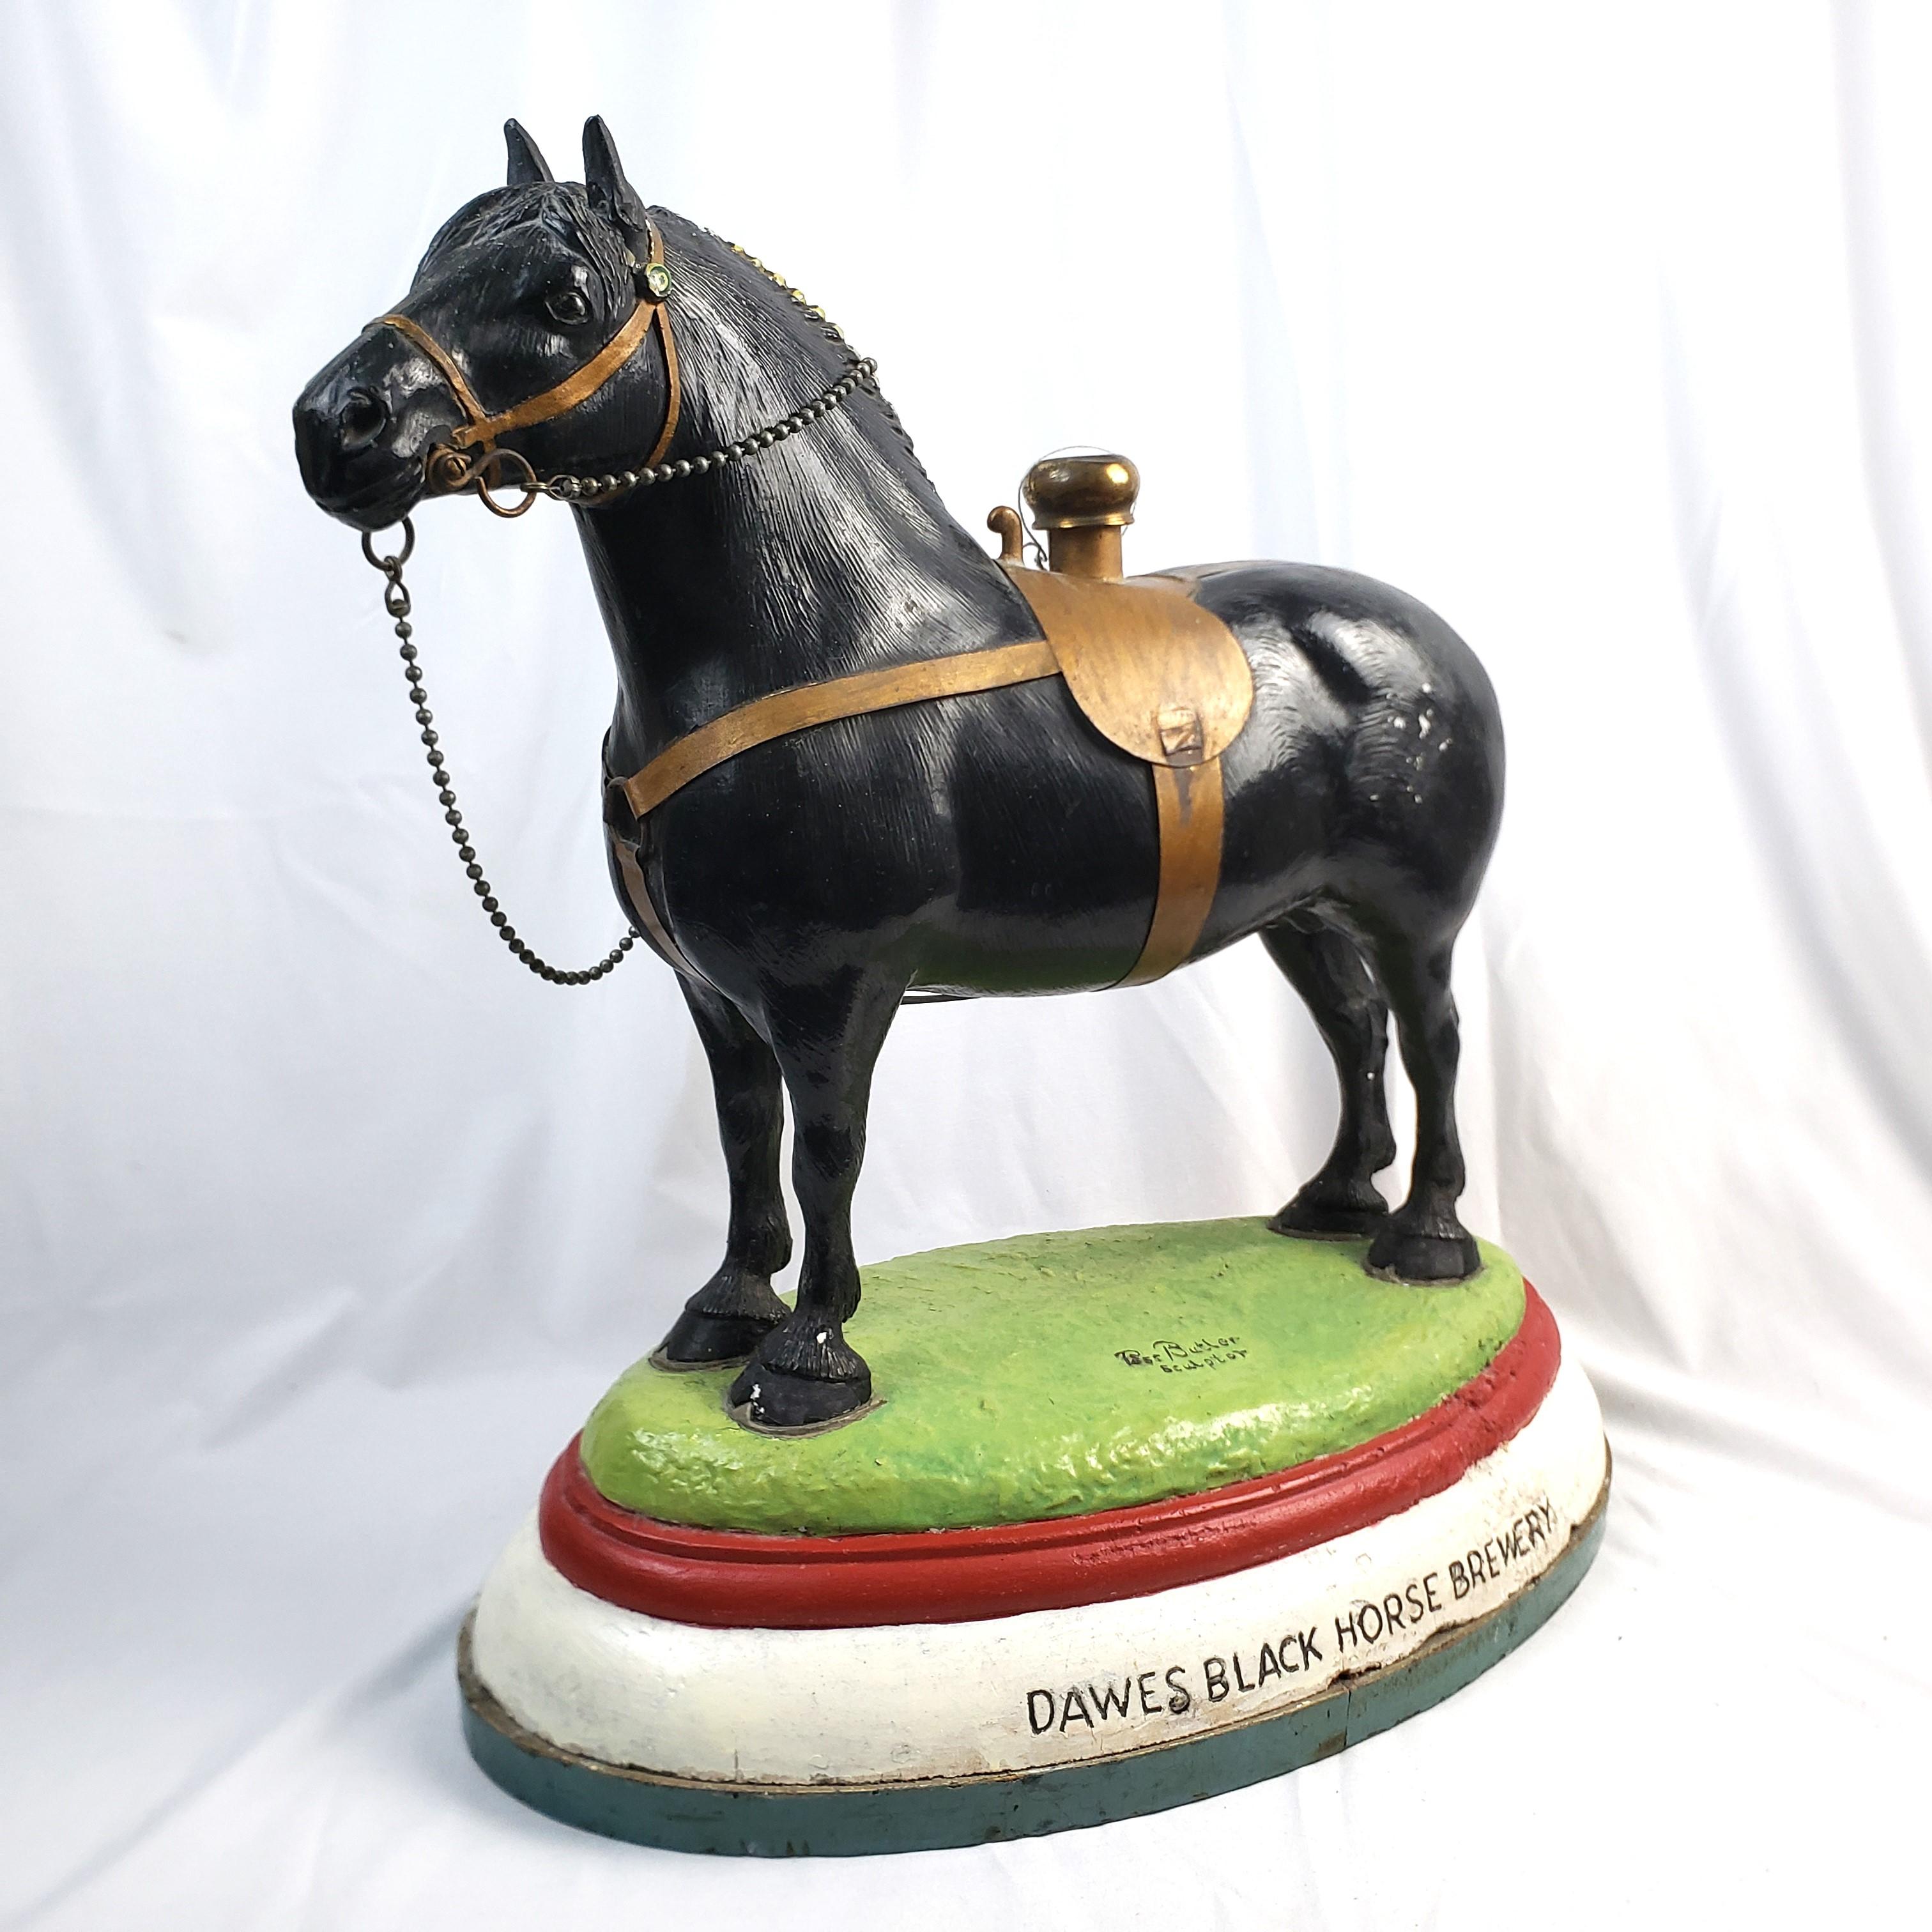 This large horse sculpture was done by Ross Butler to advertise and prooste Black Horse brand beer for Dawes Brewery of Montreal Canada. The detailed sculpture is done with a molded plaster or composite chalkware and cold painted. The sculpture